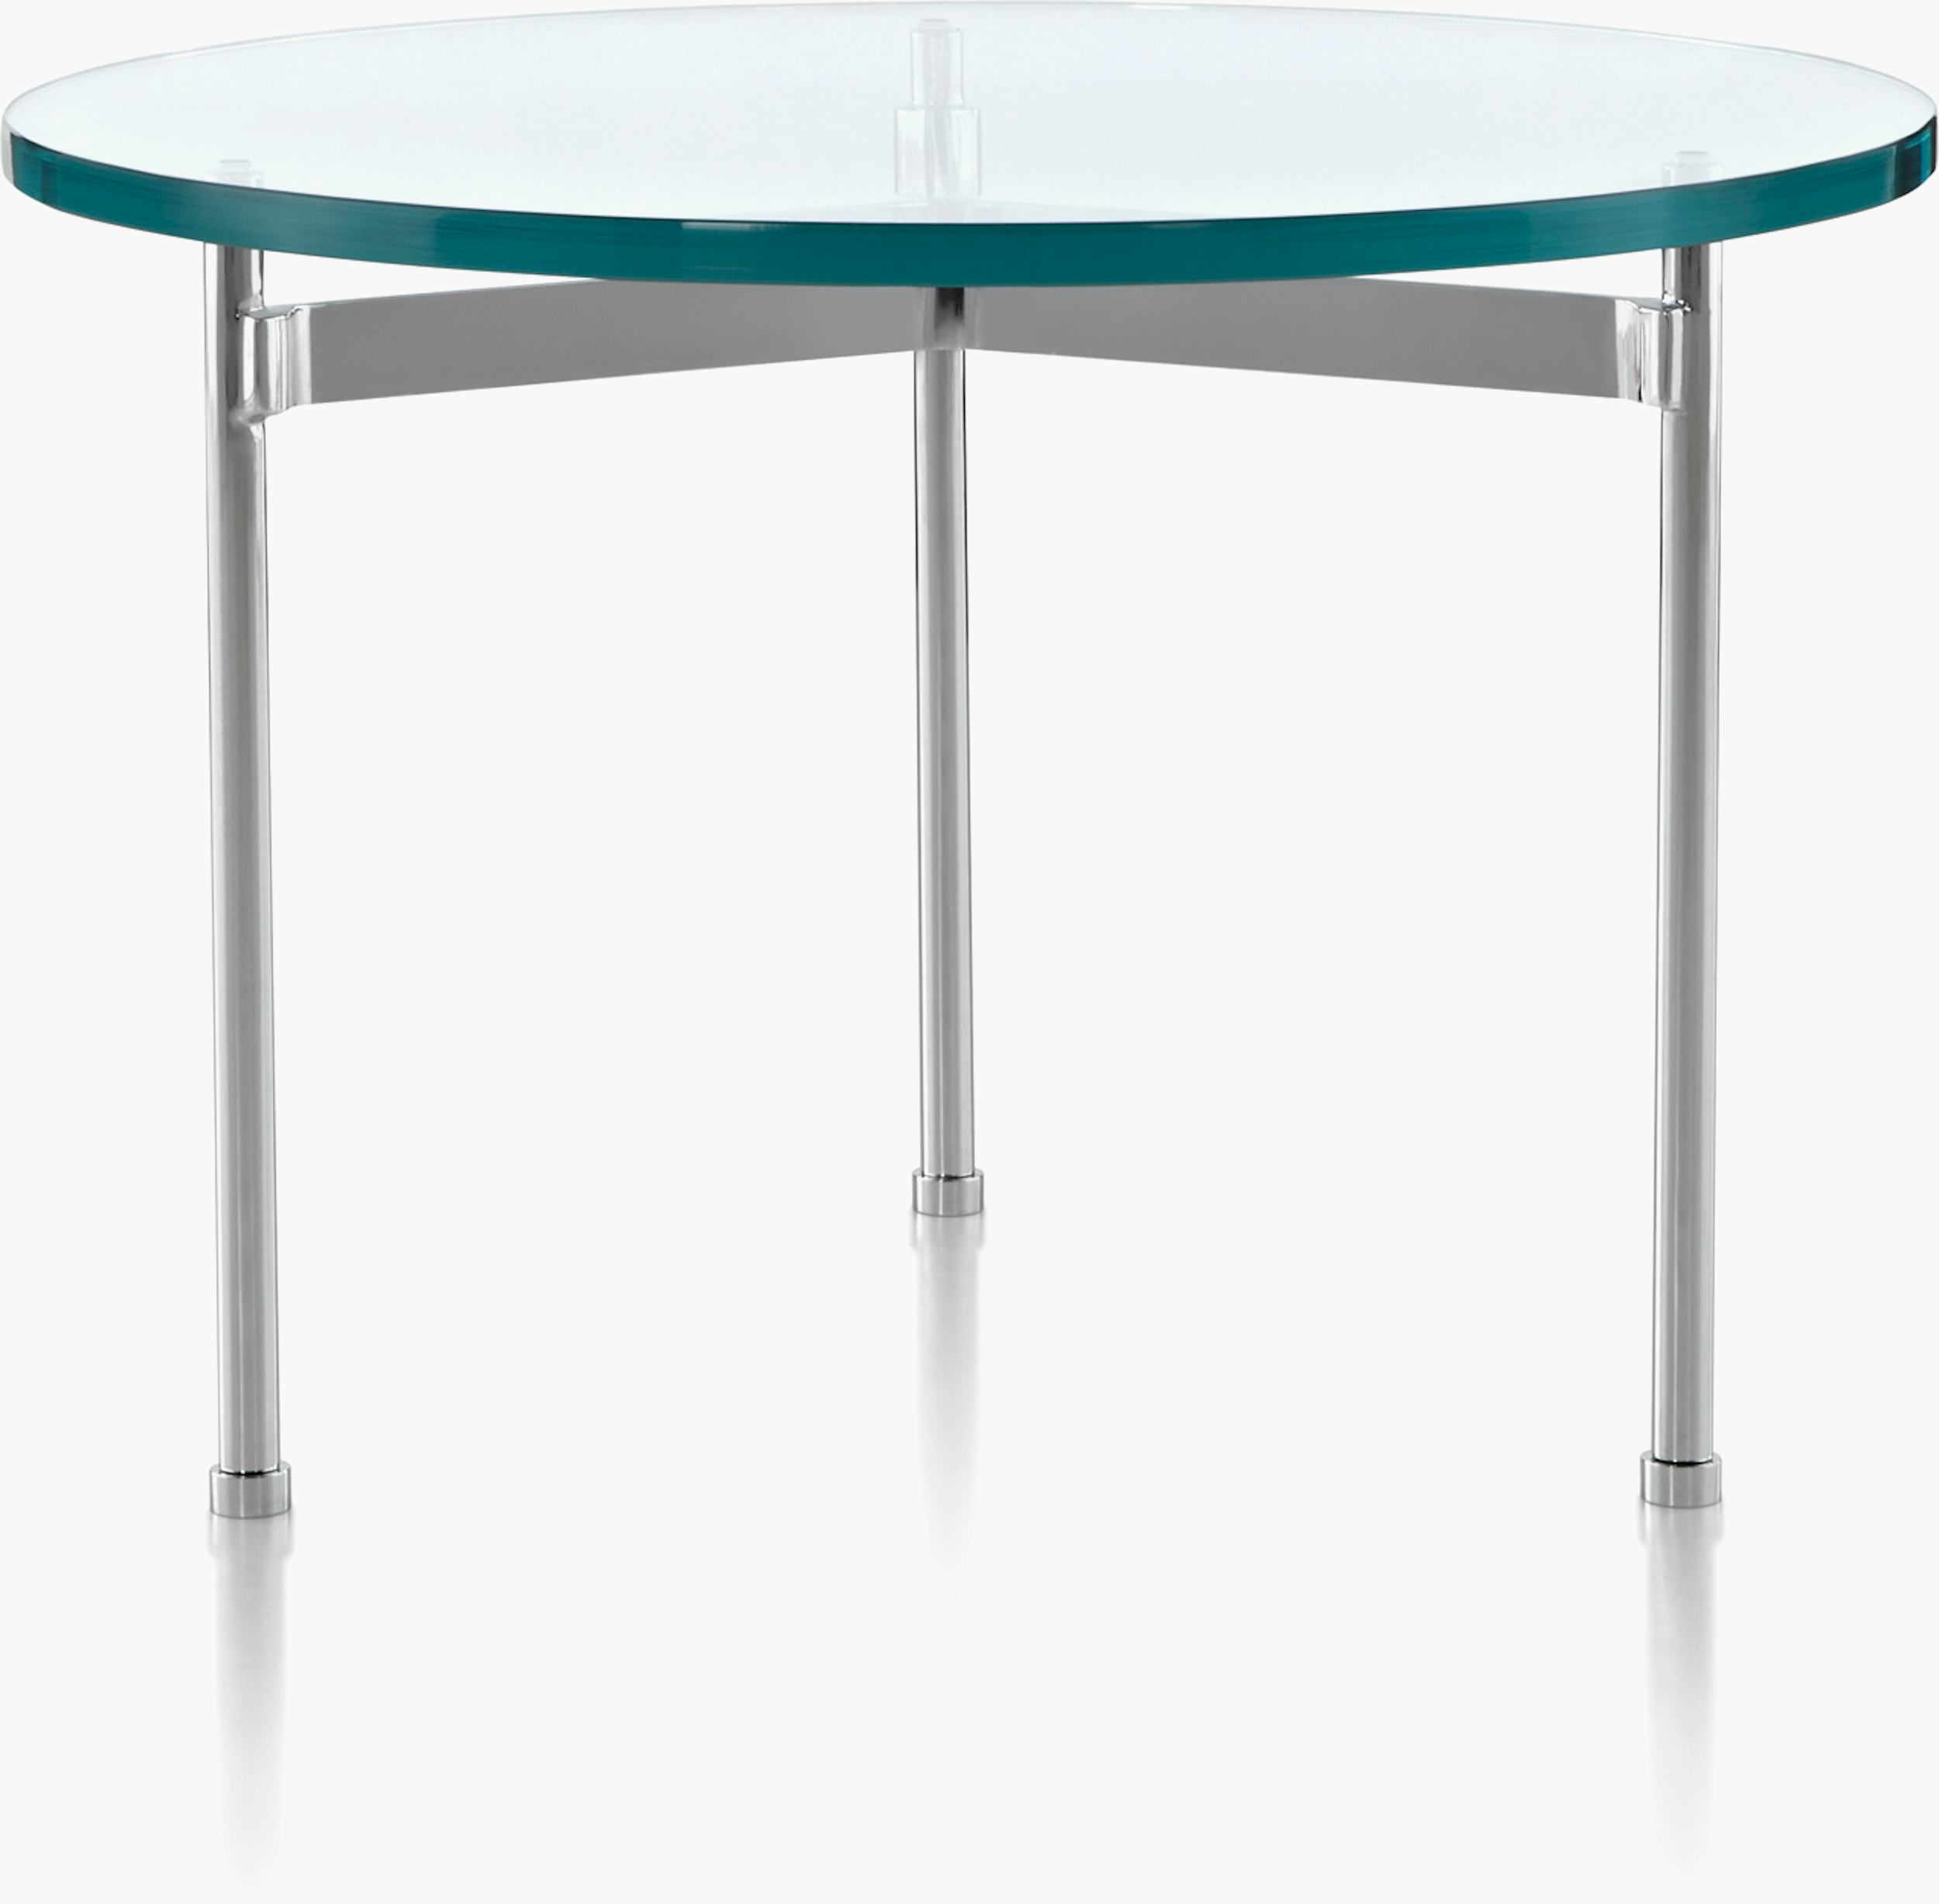 – Claw Within Design Reach Table